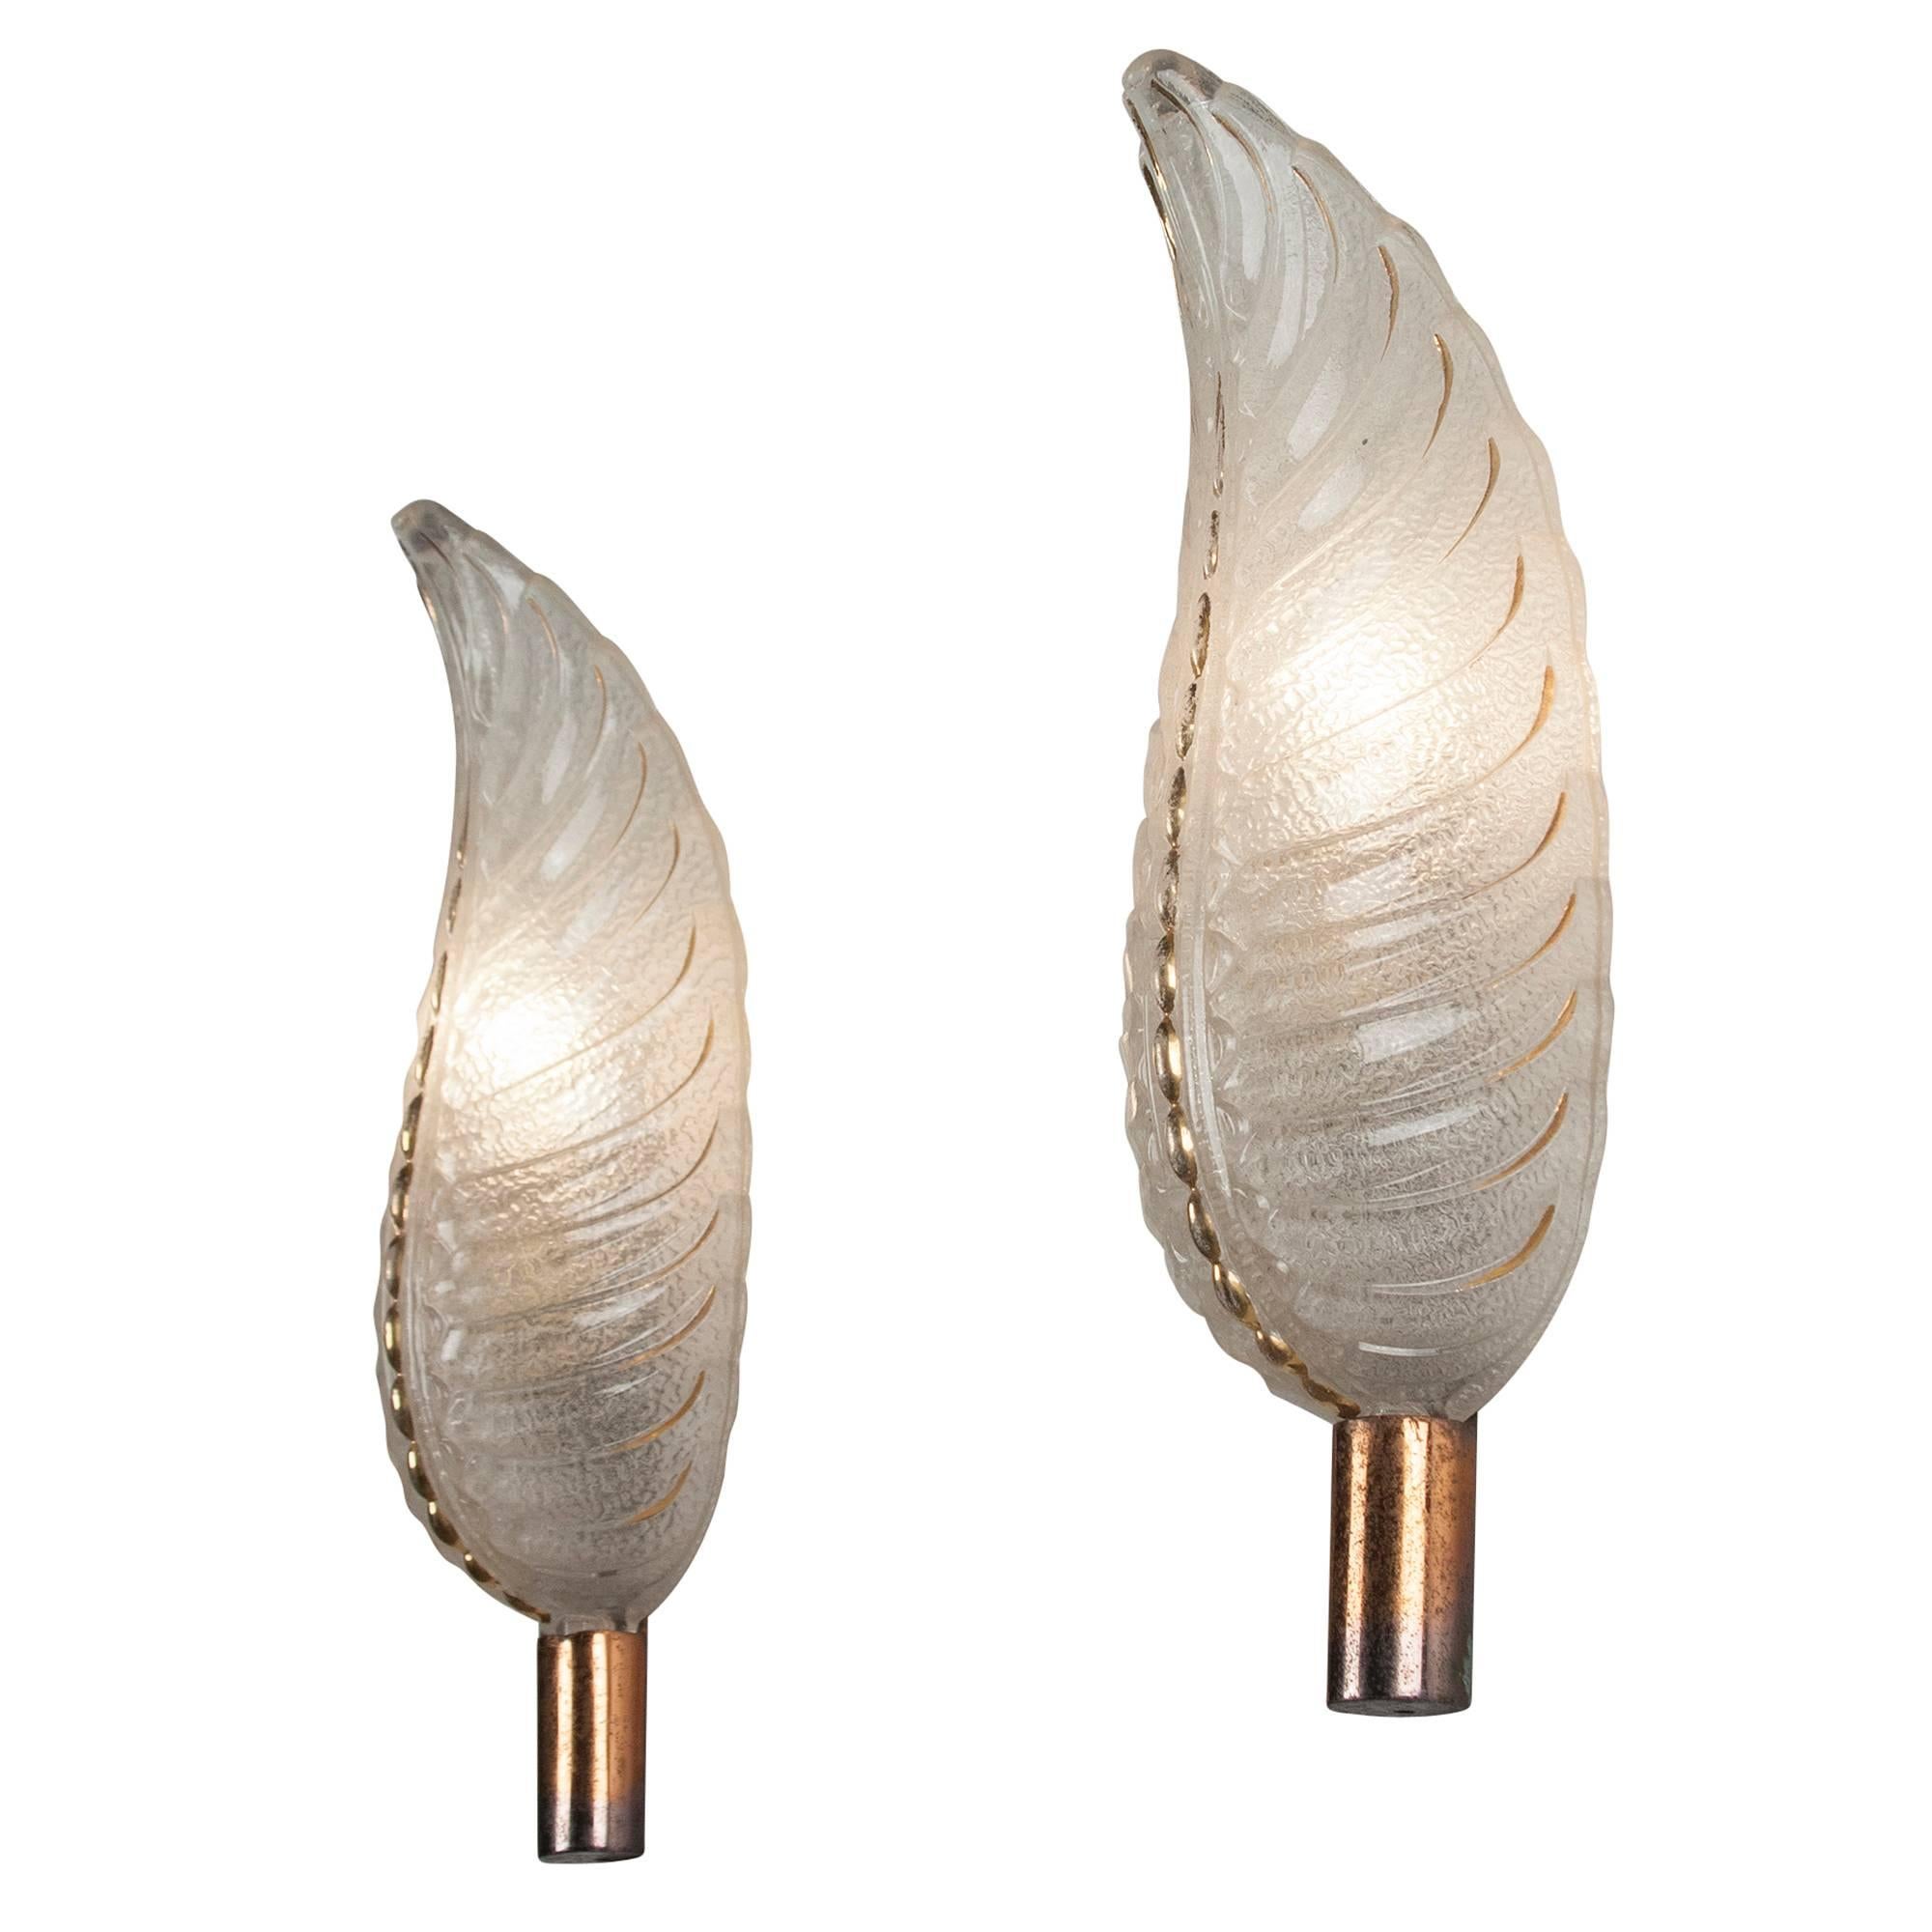 Art Deco Pair of Ezan Leaf Sconces, French, 1940s For Sale